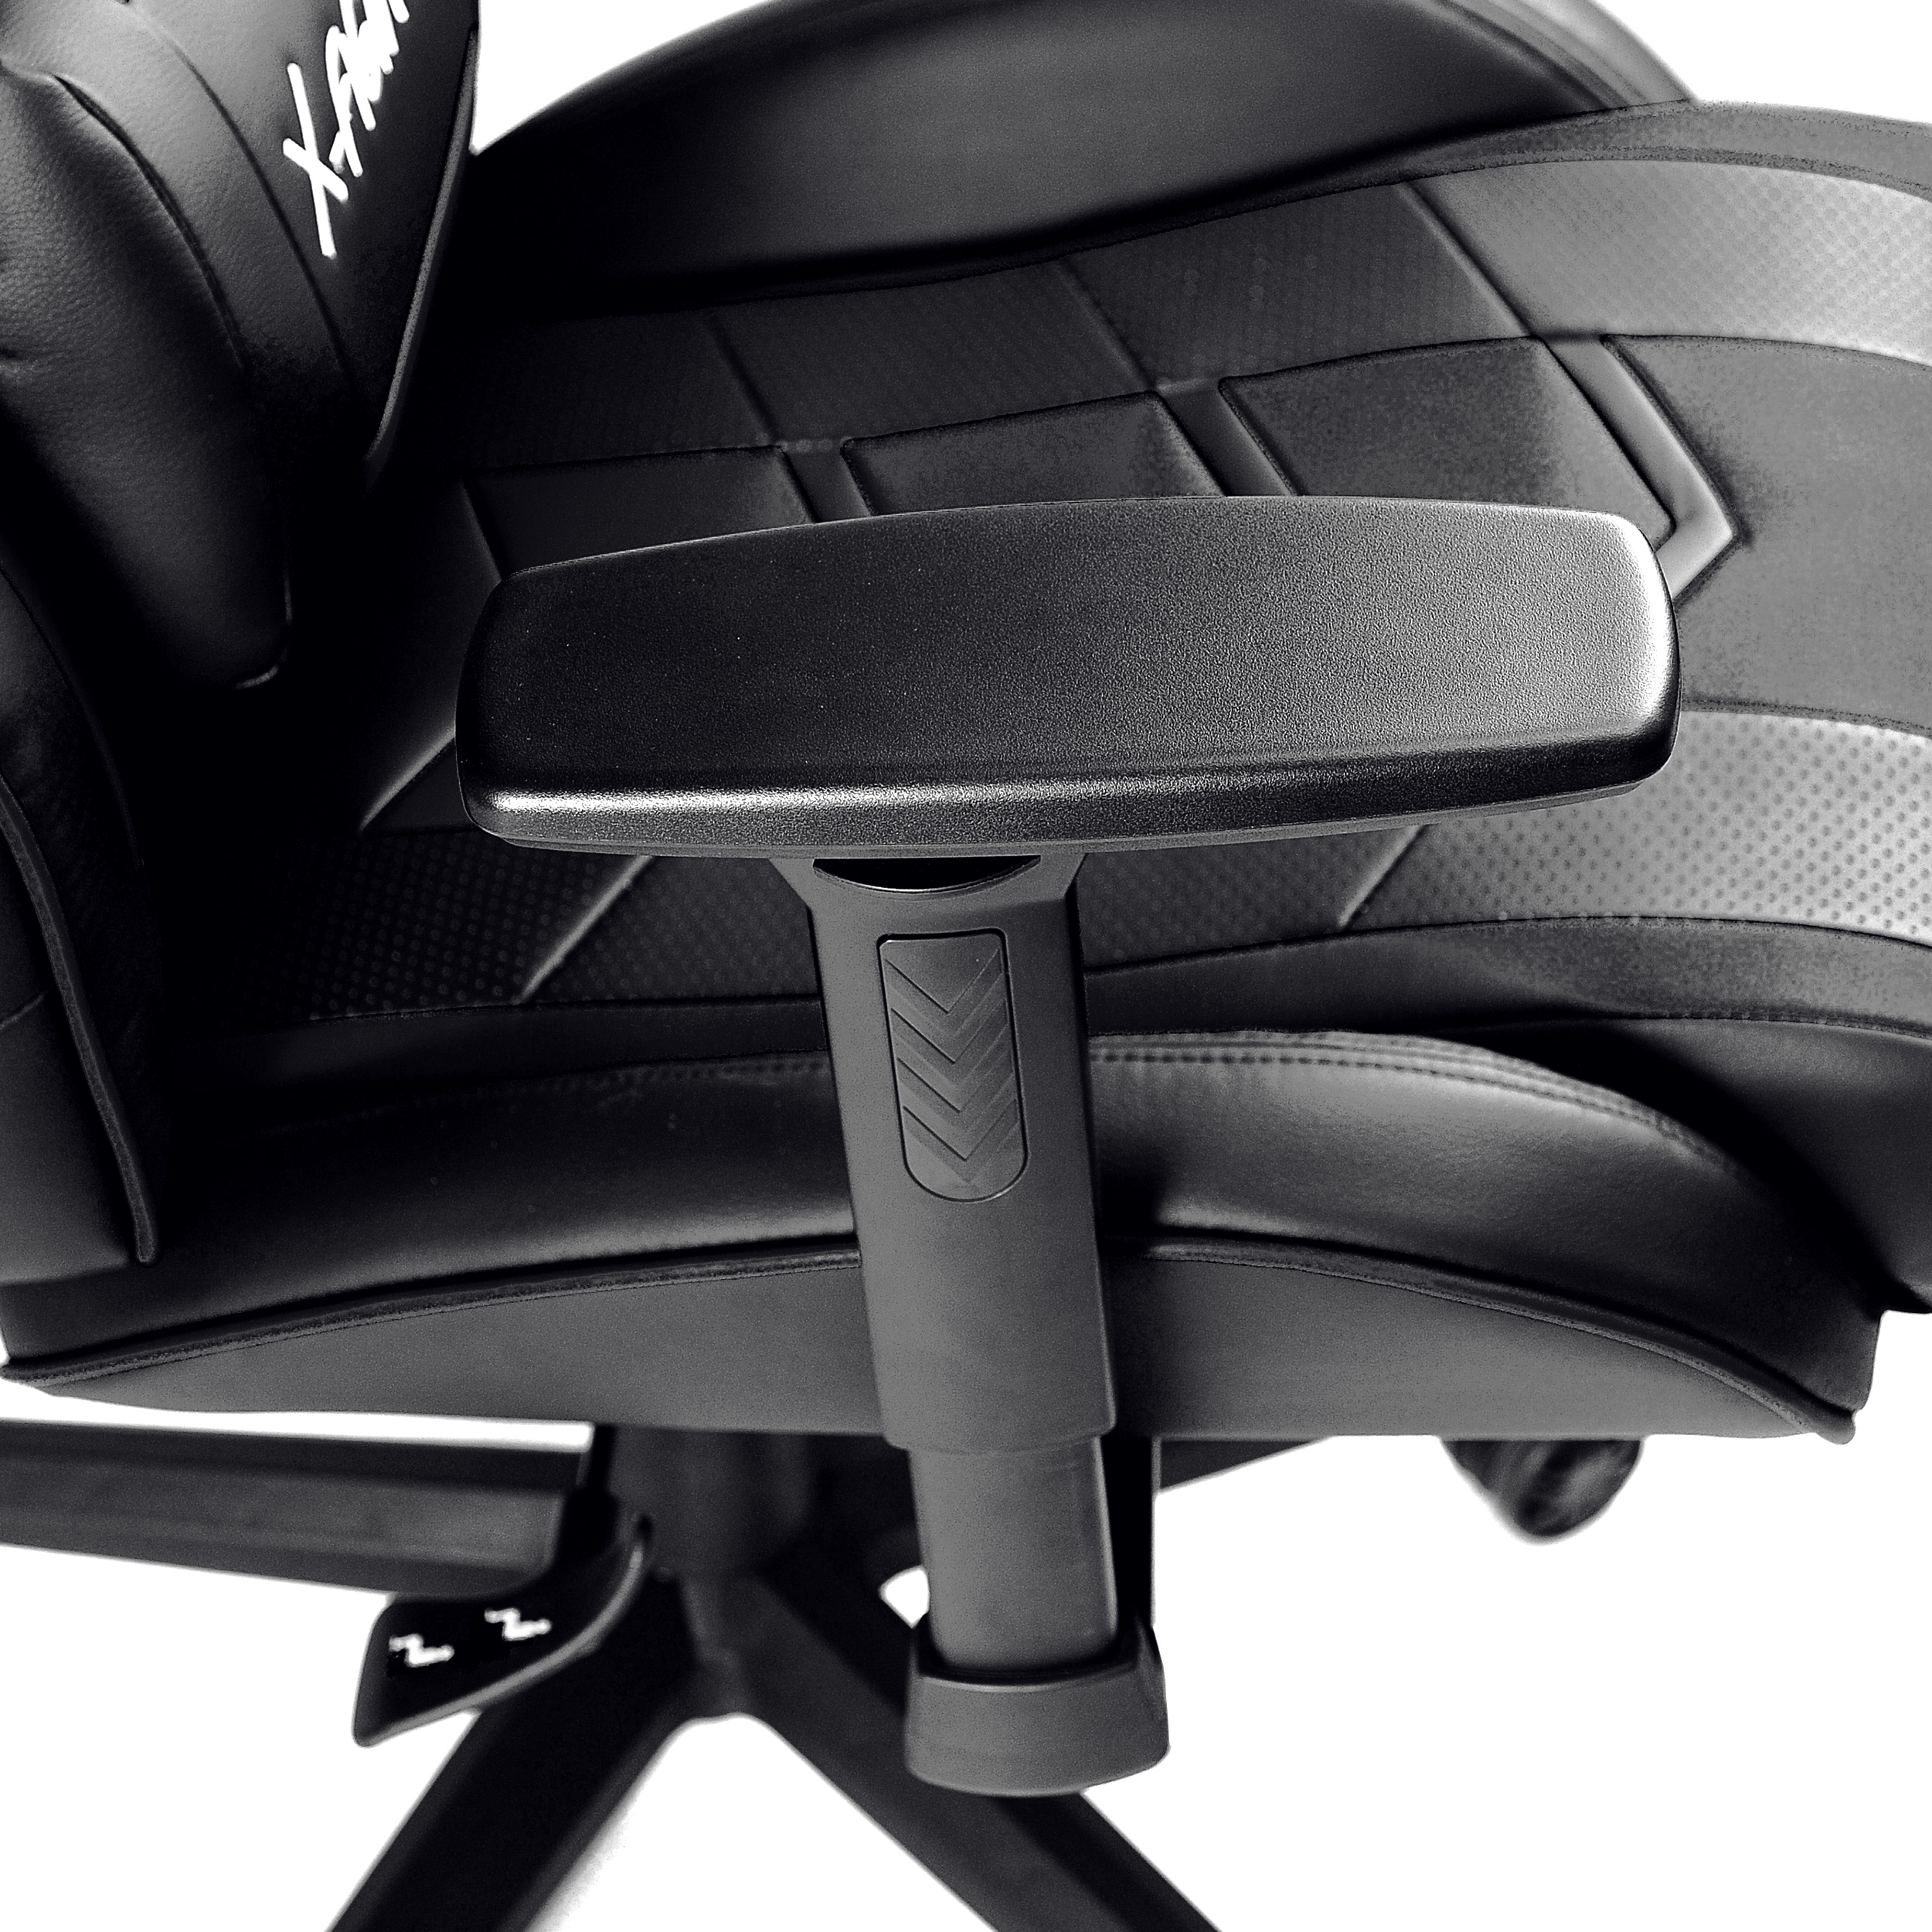 DIABLO CHAIRS GAMING STUHL X-FIGHTER black Gaming NORMAL Chair